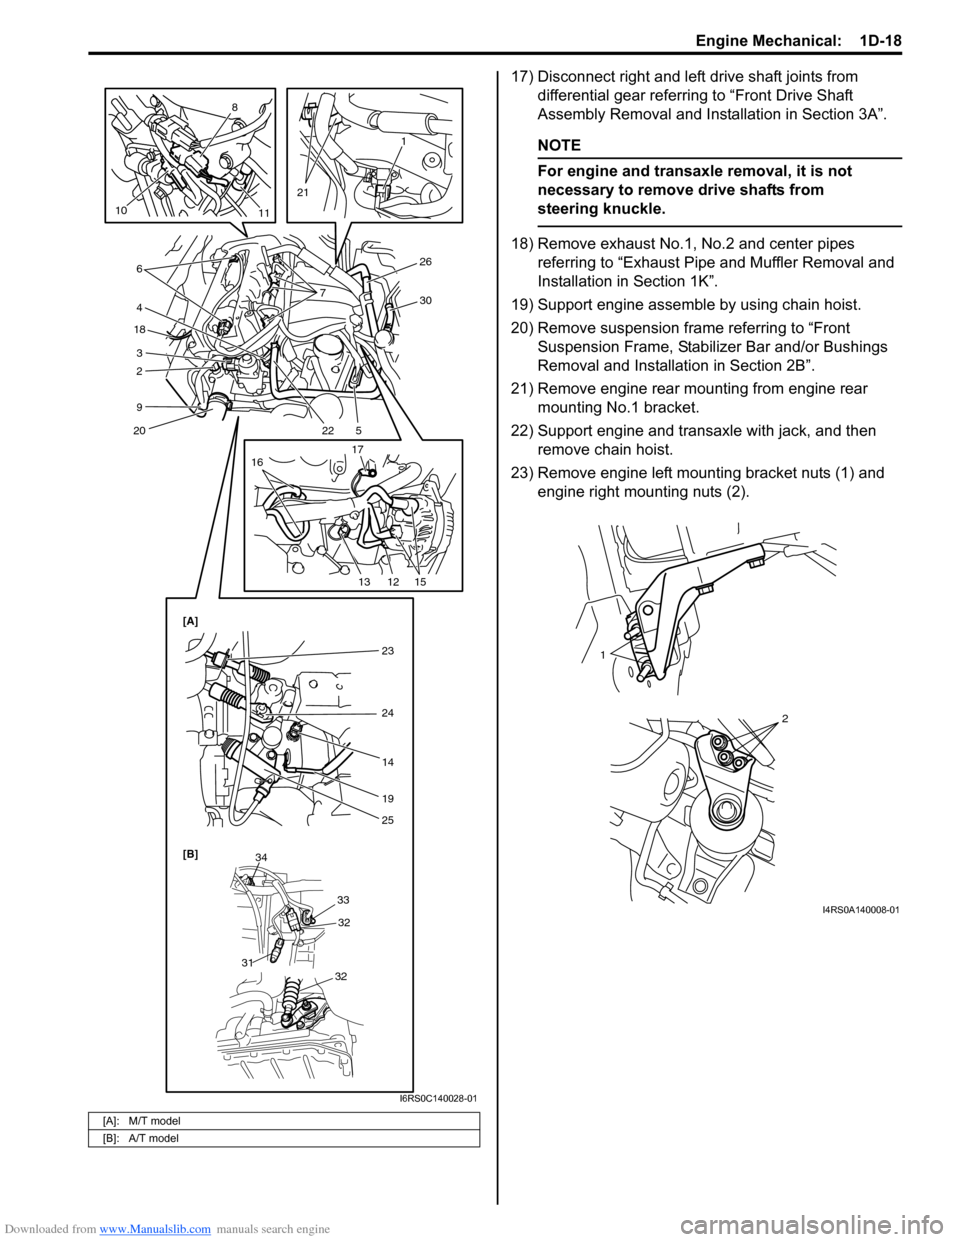 SUZUKI SWIFT 2008 2.G Service User Guide Downloaded from www.Manualslib.com manuals search engine Engine Mechanical:  1D-18
17) Disconnect right and left drive shaft joints from differential gear referring to “Front Drive Shaft 
Assembly R